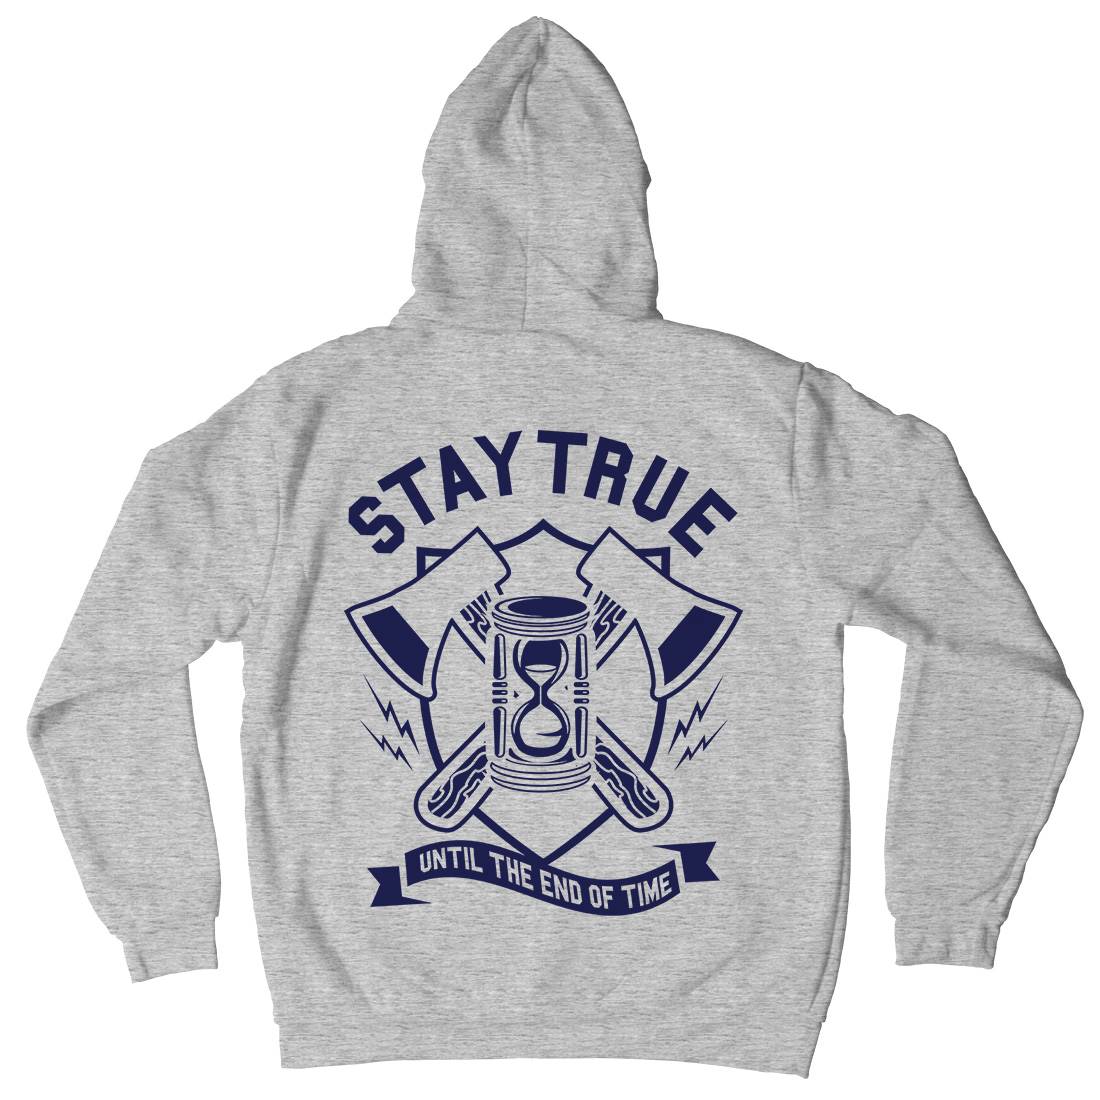 Stay True Mens Hoodie With Pocket Quotes A285